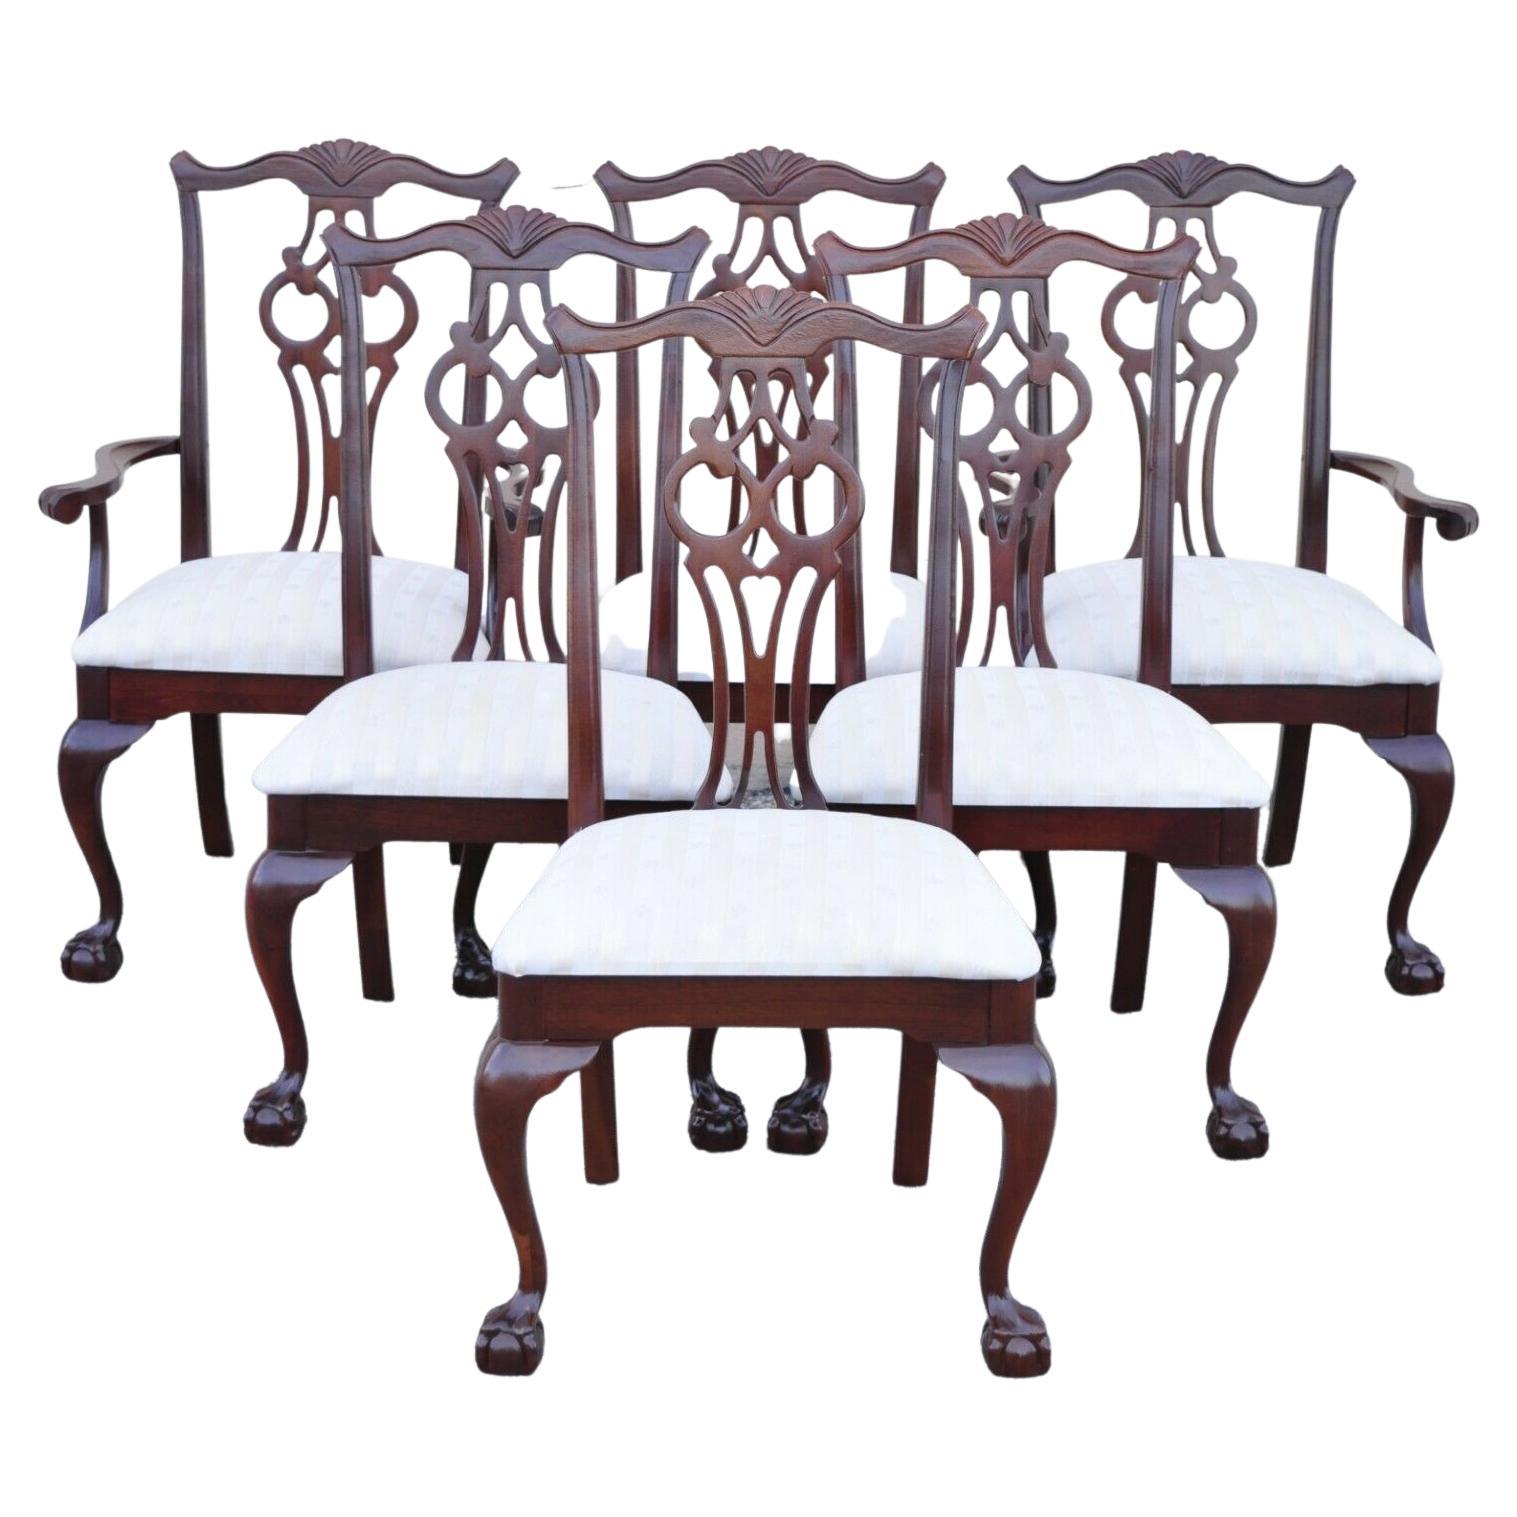 Vintage American Drew Cherry Wood Chippendale Style Dining Chairs, Set of 6